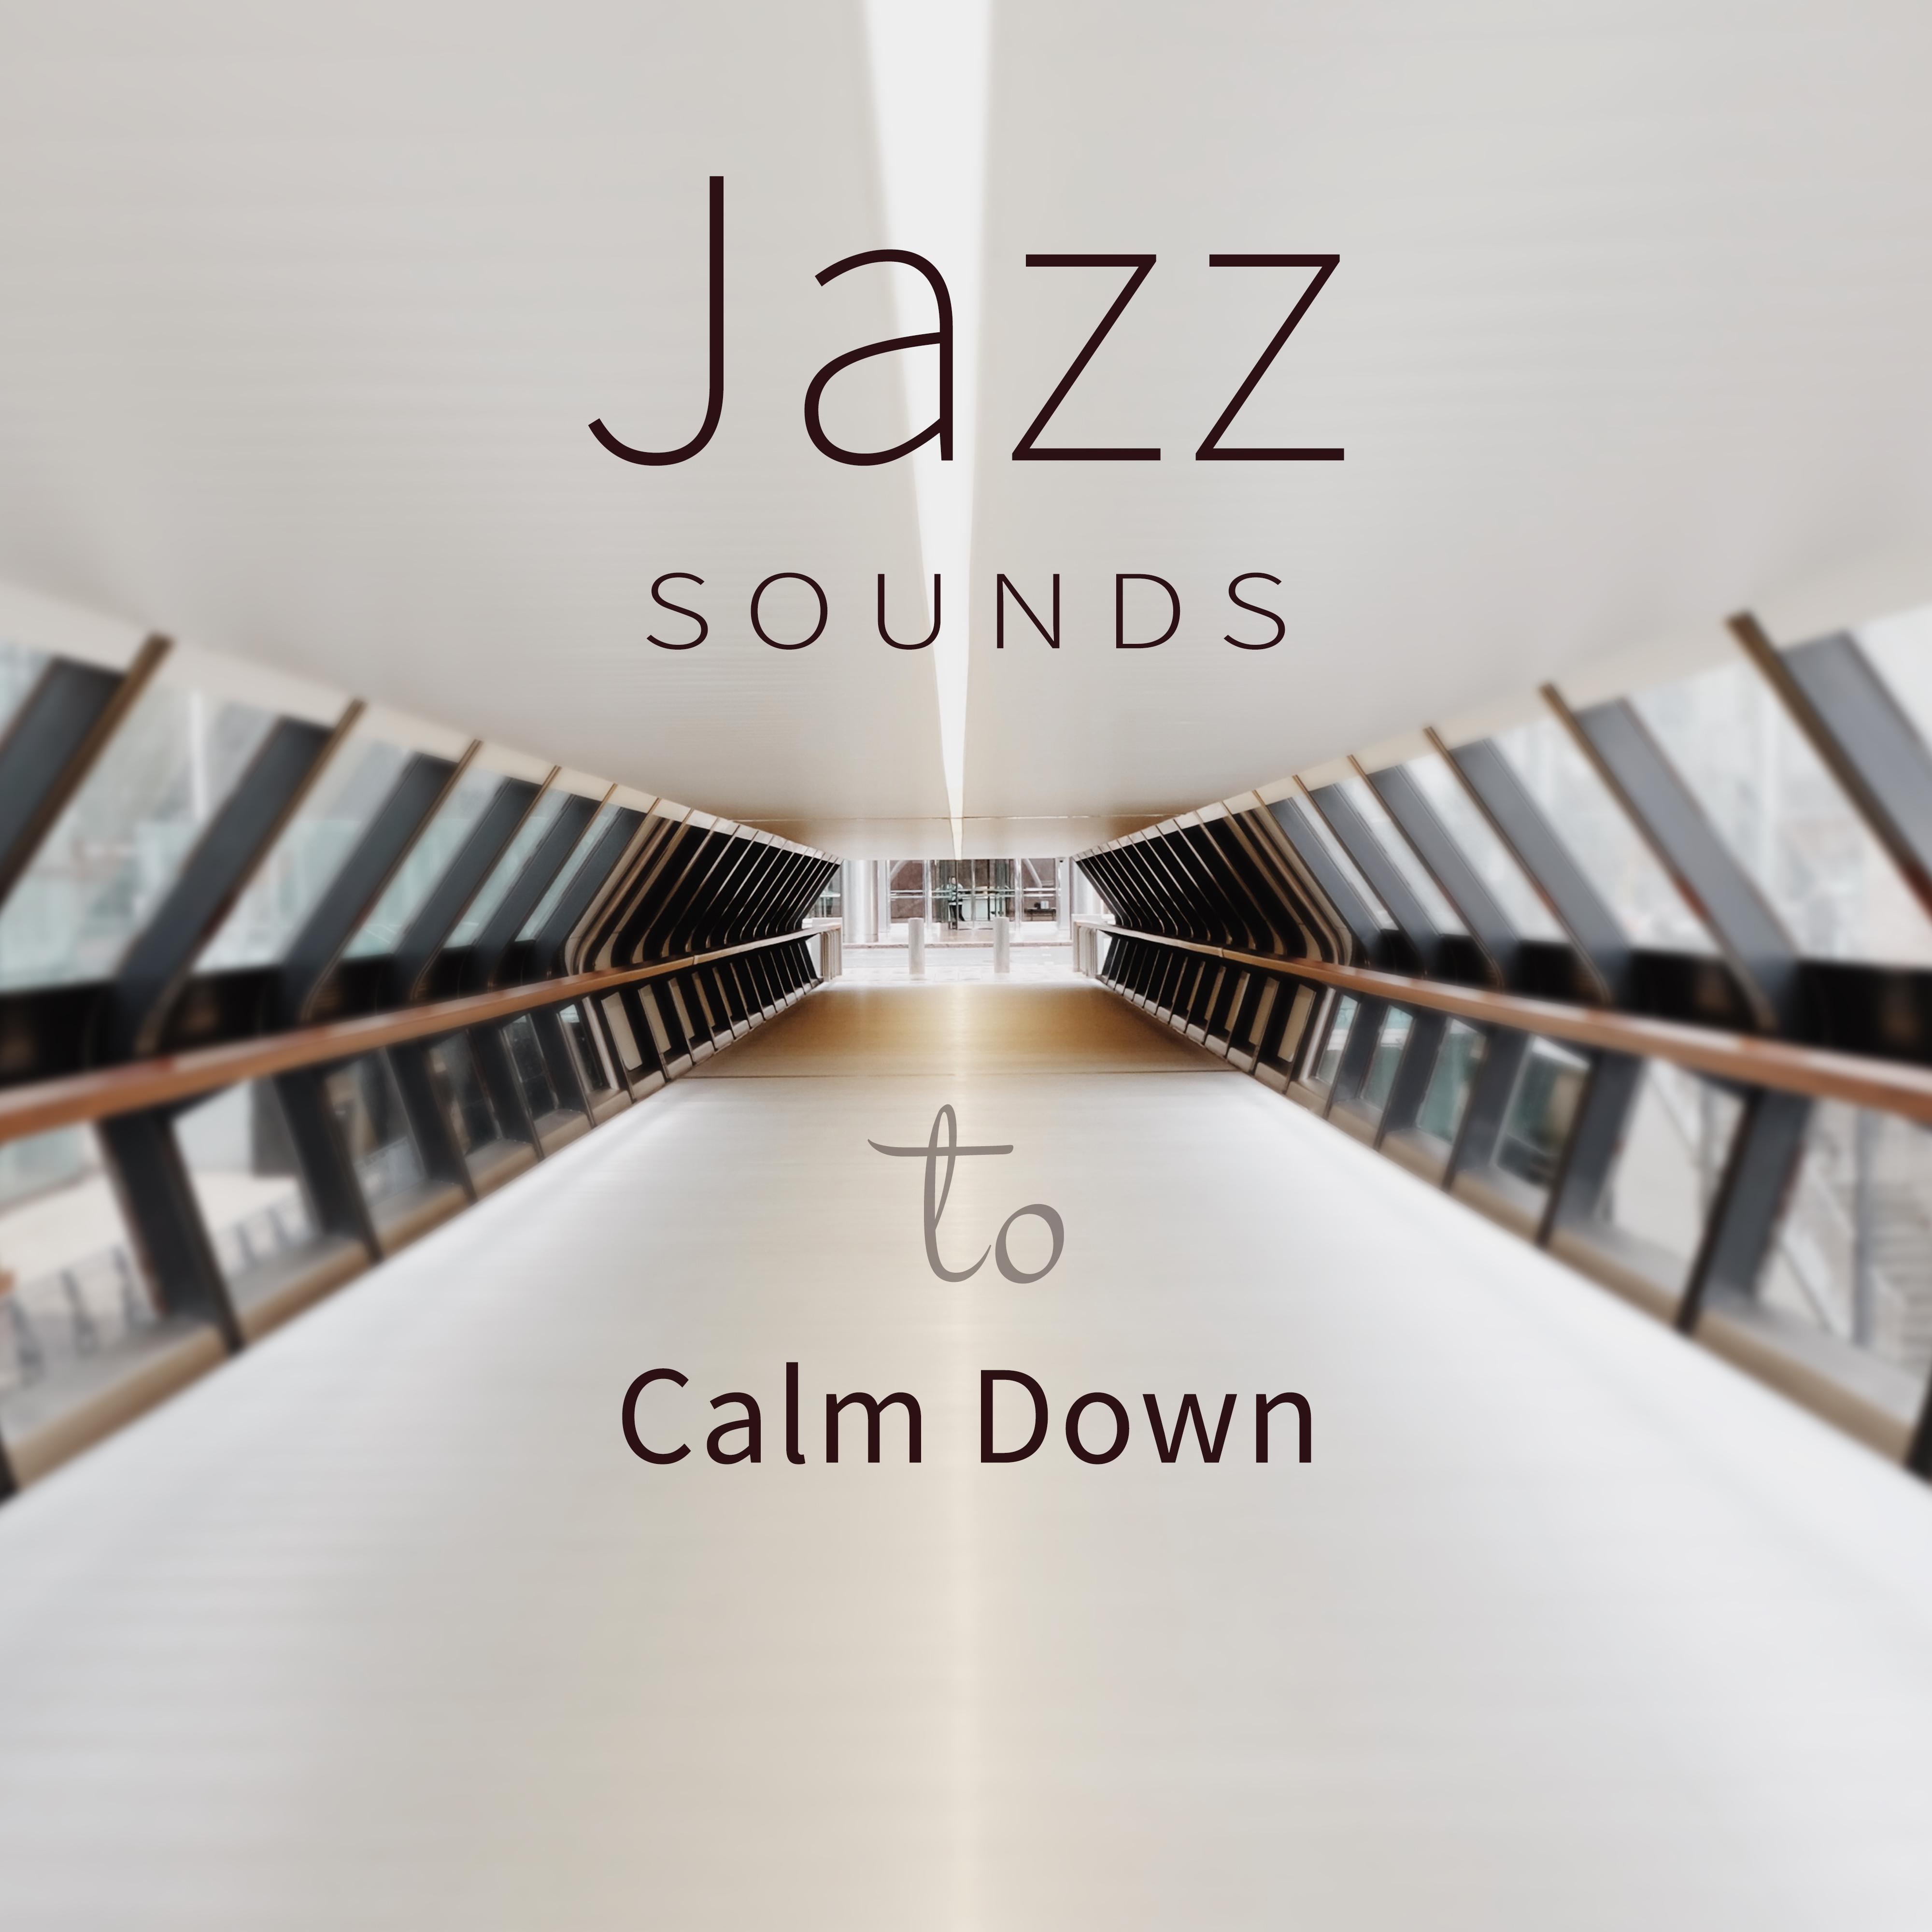 Jazz Sounds to Calm Down  Relaxing Jazz Music, Sounds to Rest, Stress Relief, Chilled Melodies